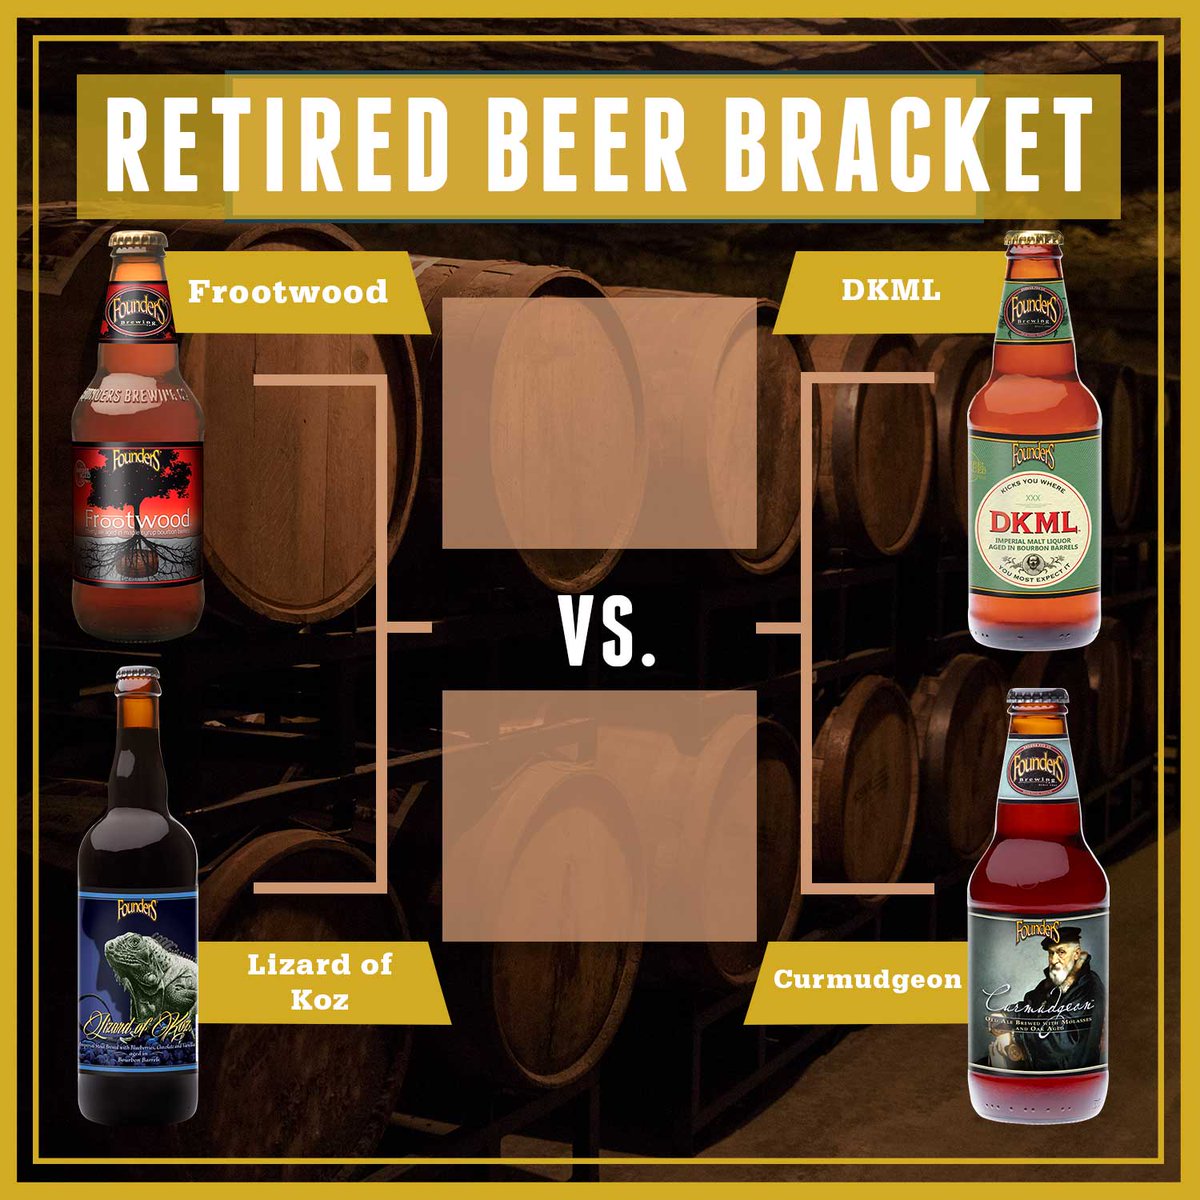 It’s time for some of our retired beers to battle it out! Maybe it’s the nostalgia talking but we can’t stop thinking about these timeless classics. Comment below to help us choose which beer will win it all.